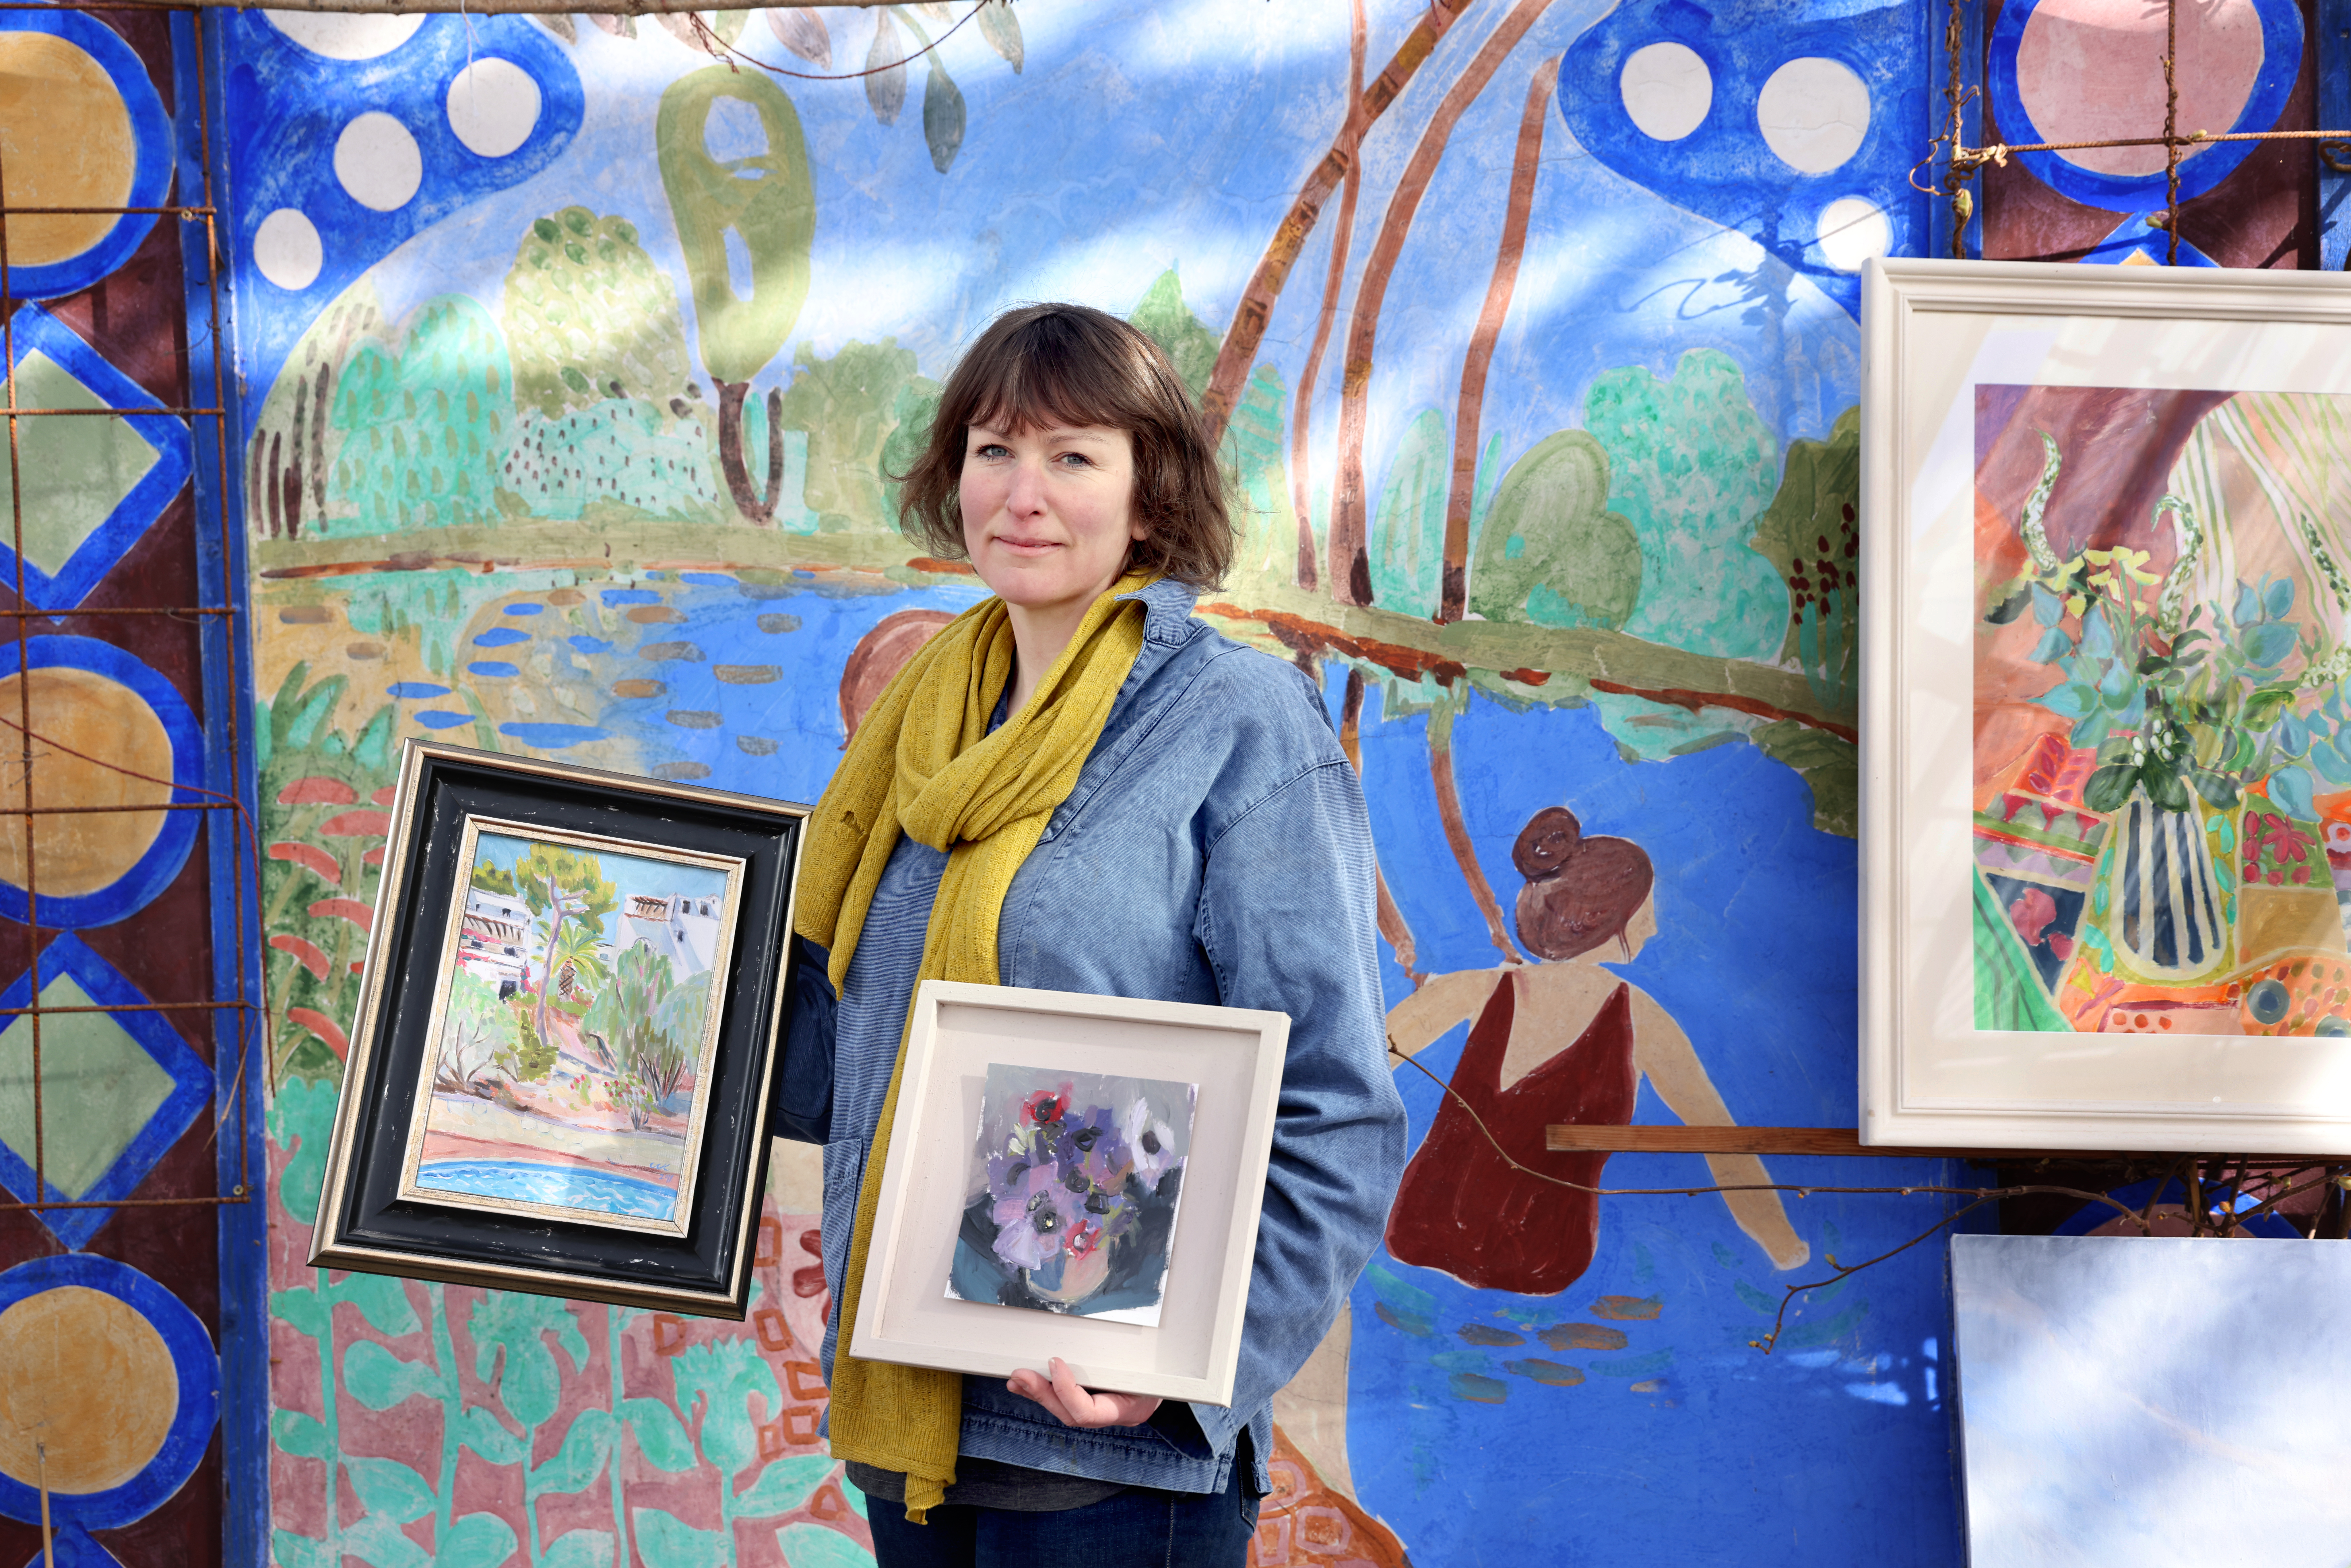 Walled garden murals, botanical art and jewellery inspired by ancient treasures